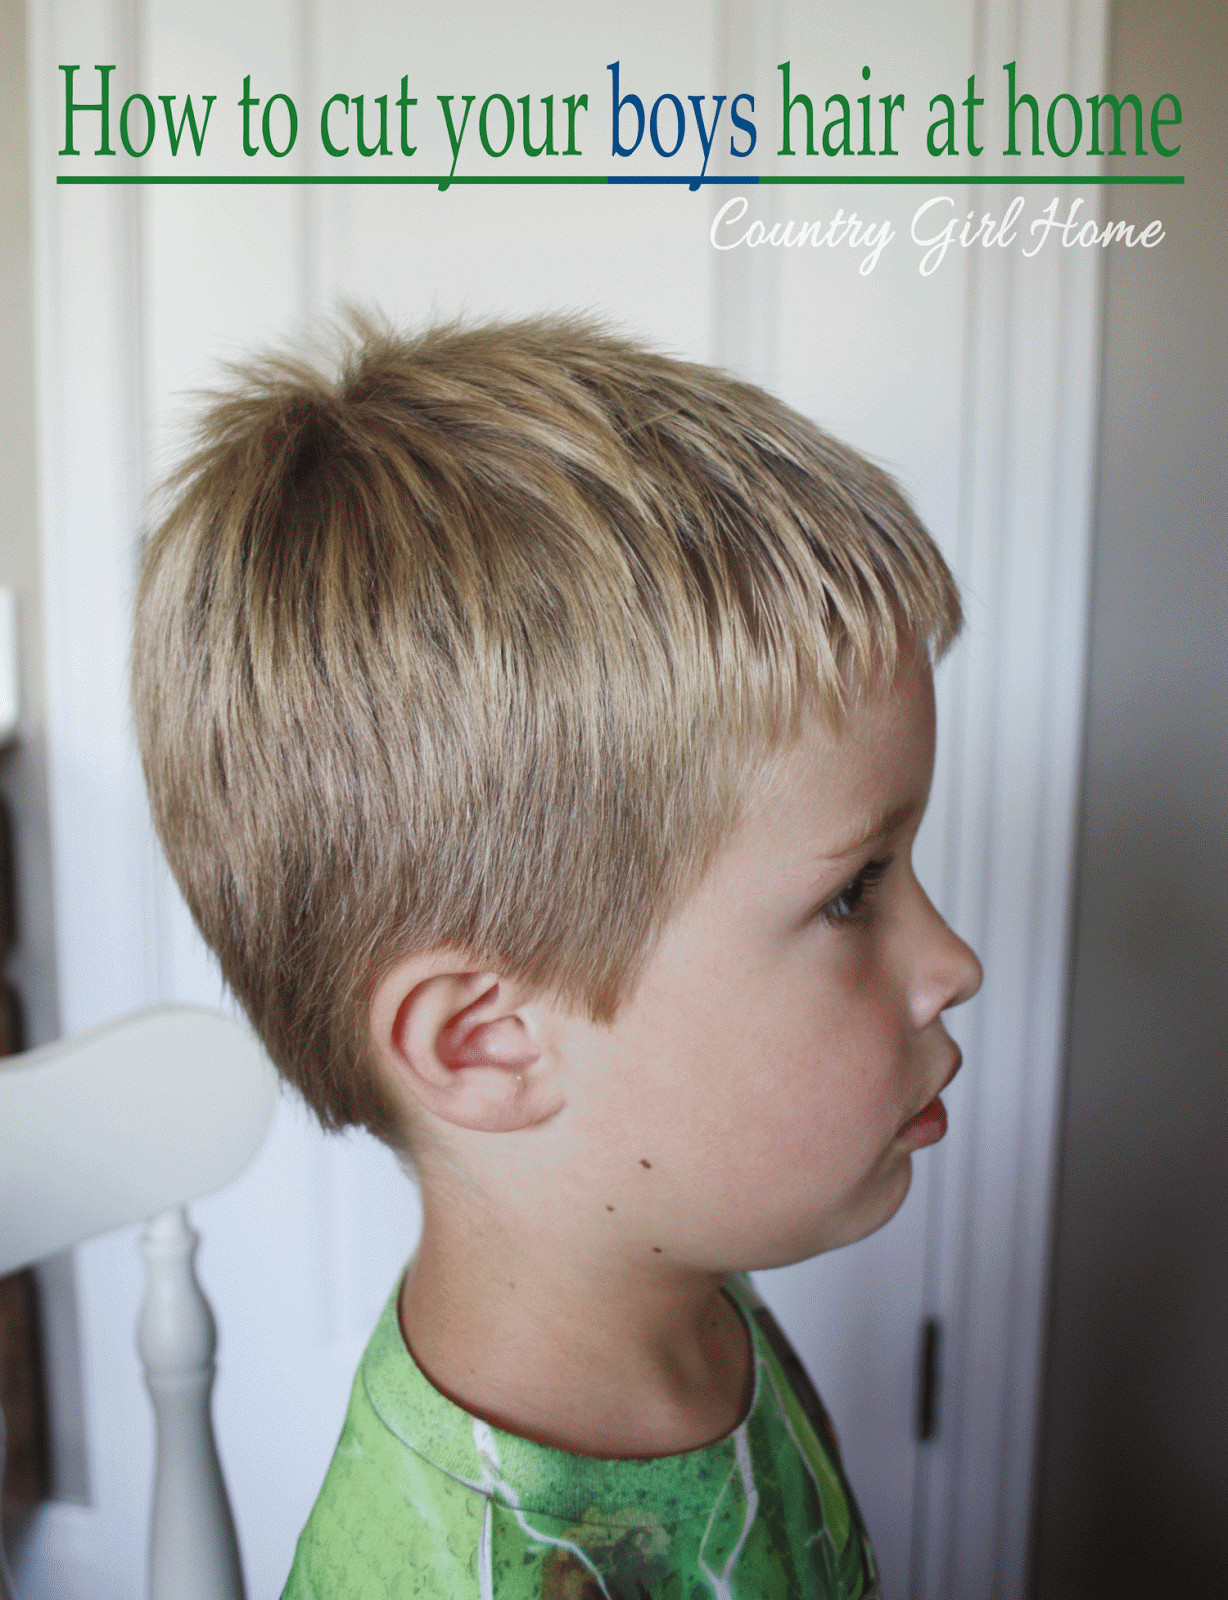 How To Cut Boys Hair
 COUNTRY GIRL HOME How to cut your boys hair at home for